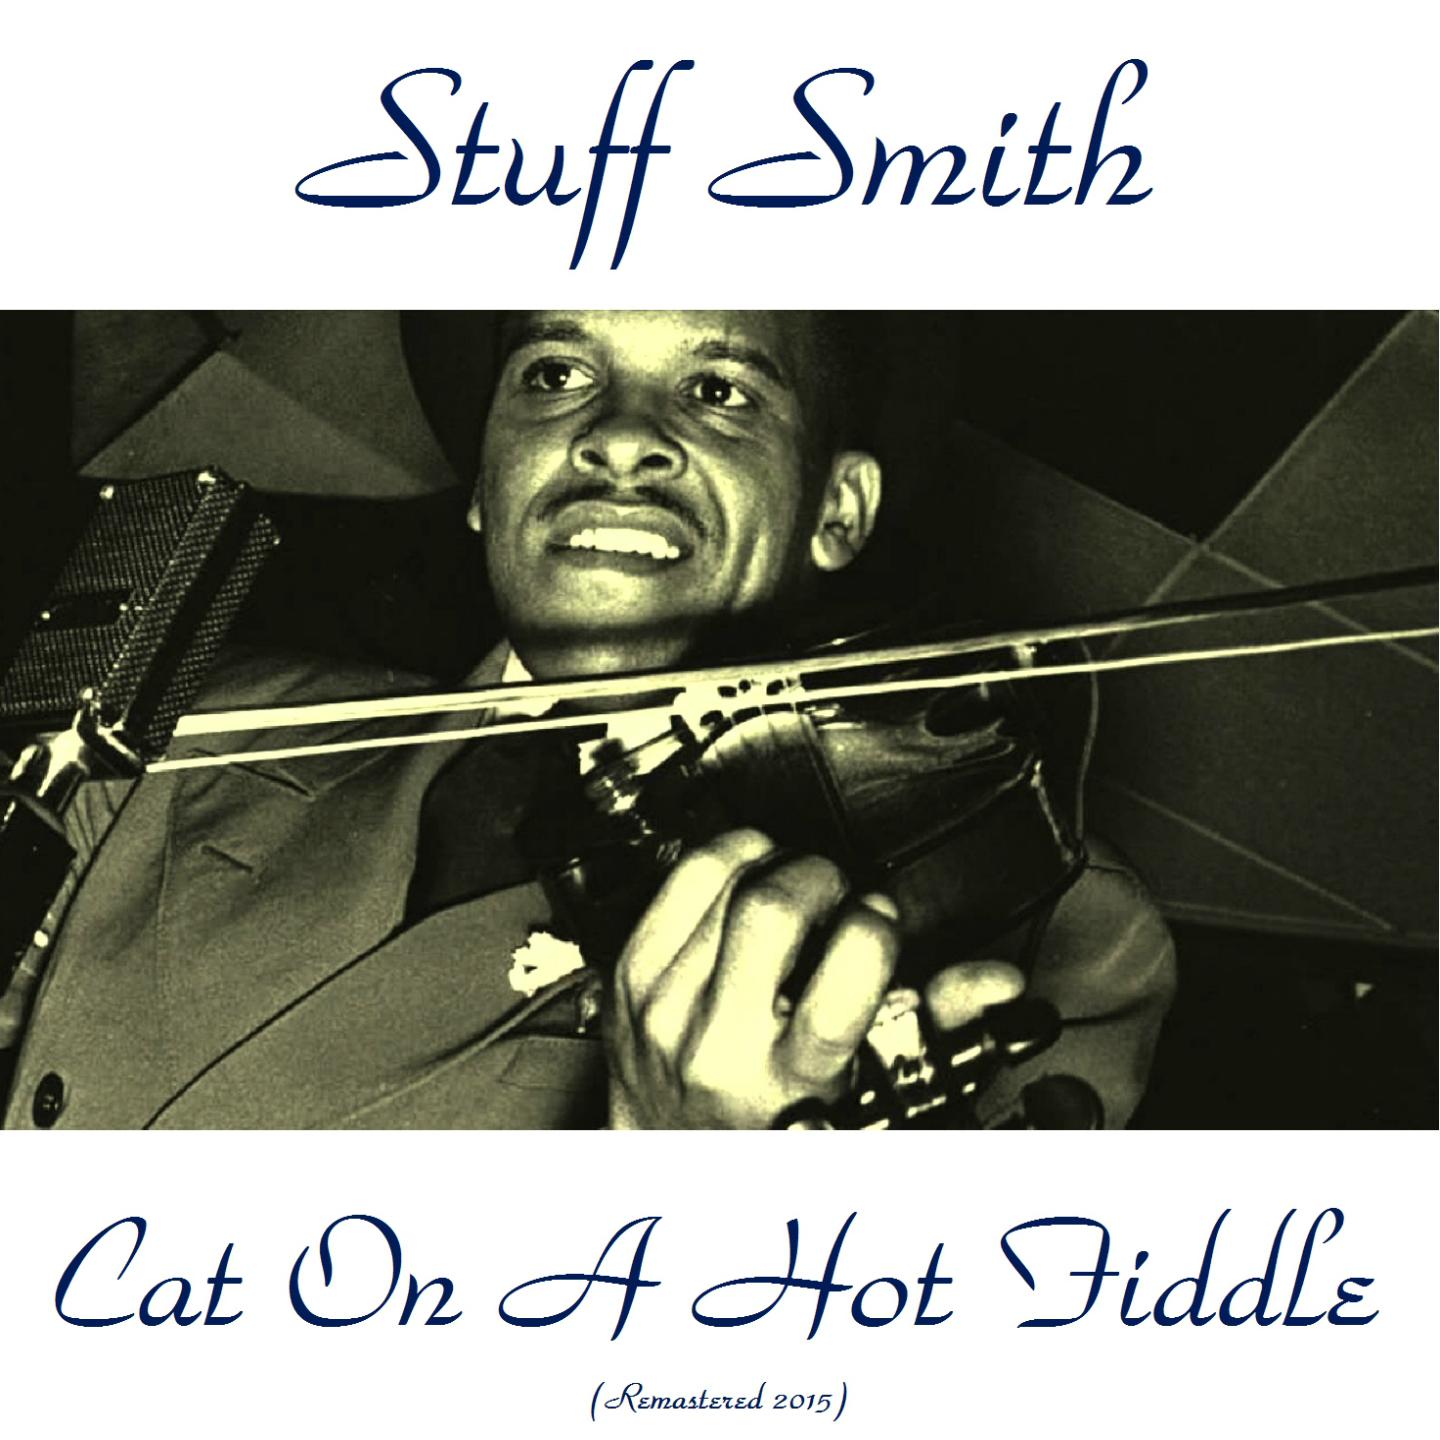 Cat on a Hot Fiddle (Remastered 2015)